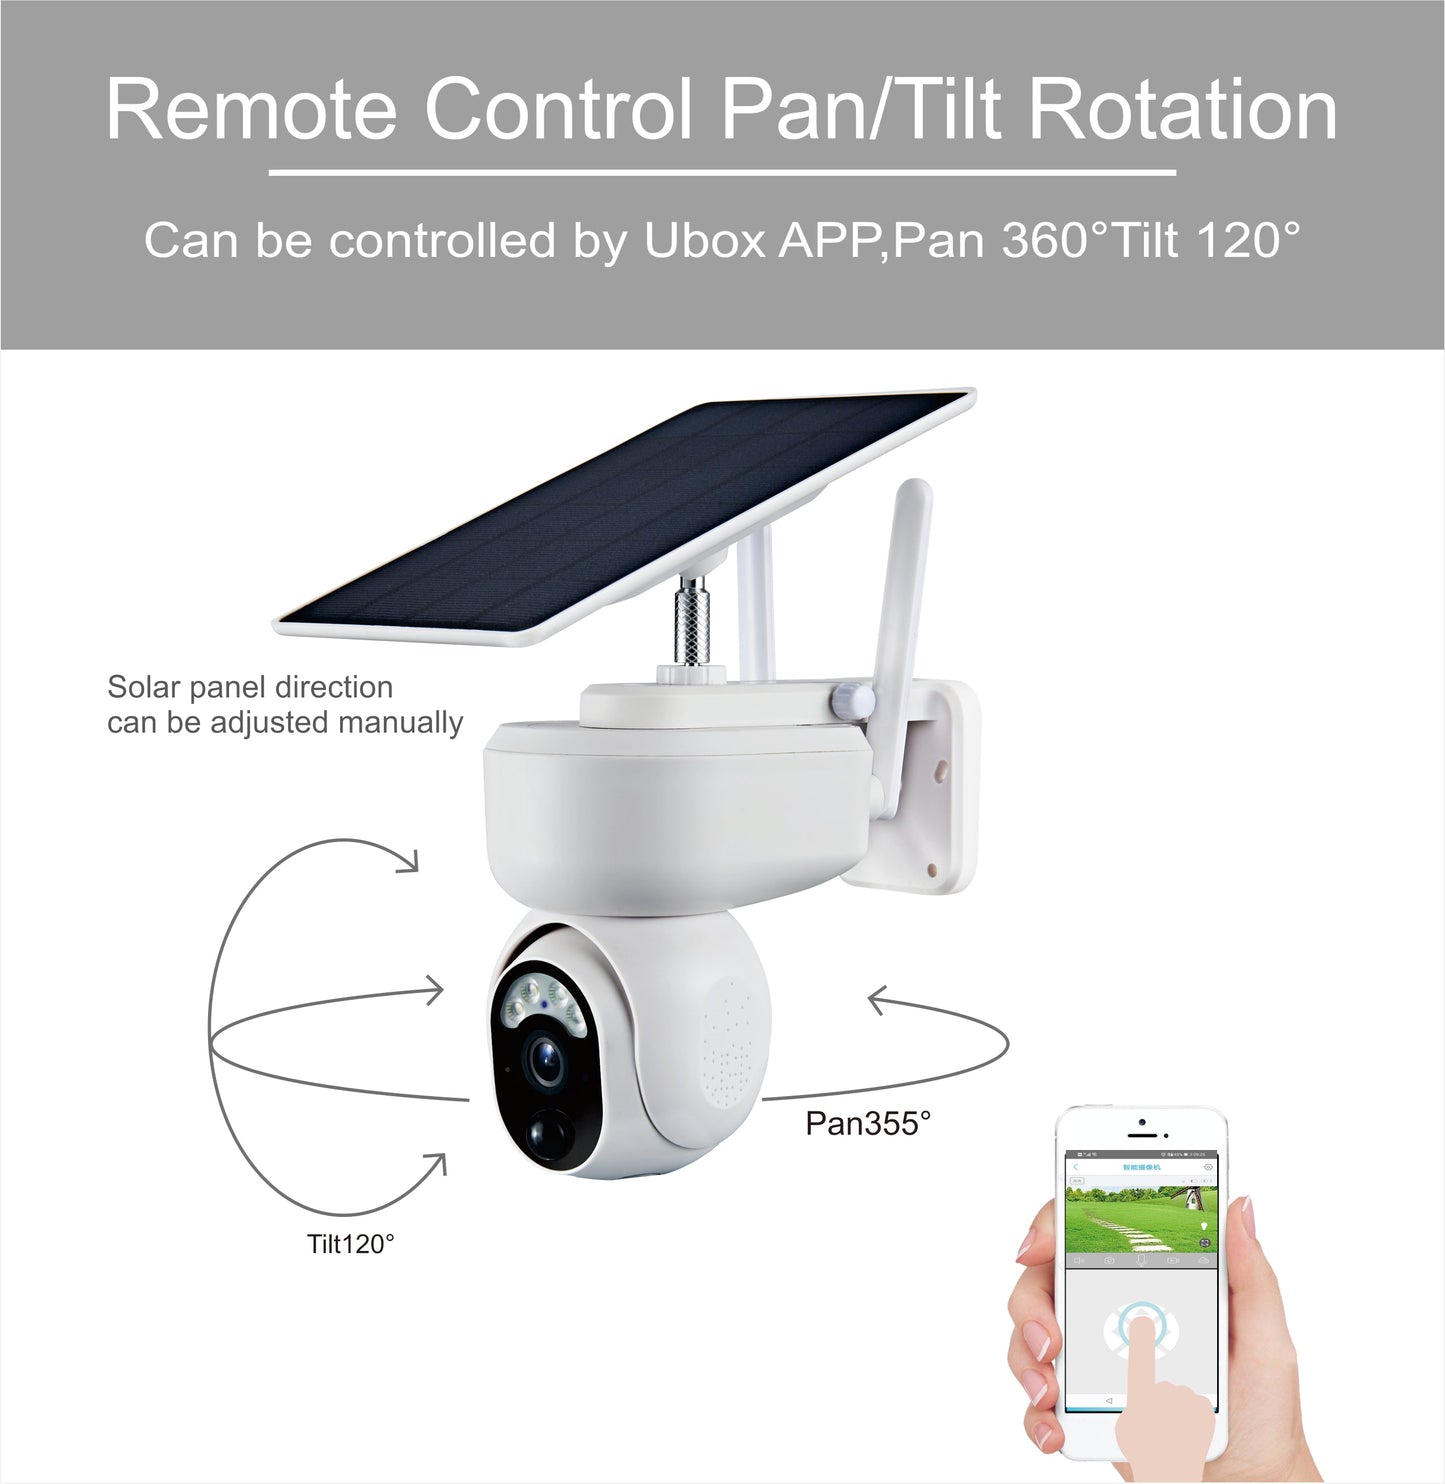 Solar PTZ Security Camera WIFI with batteries